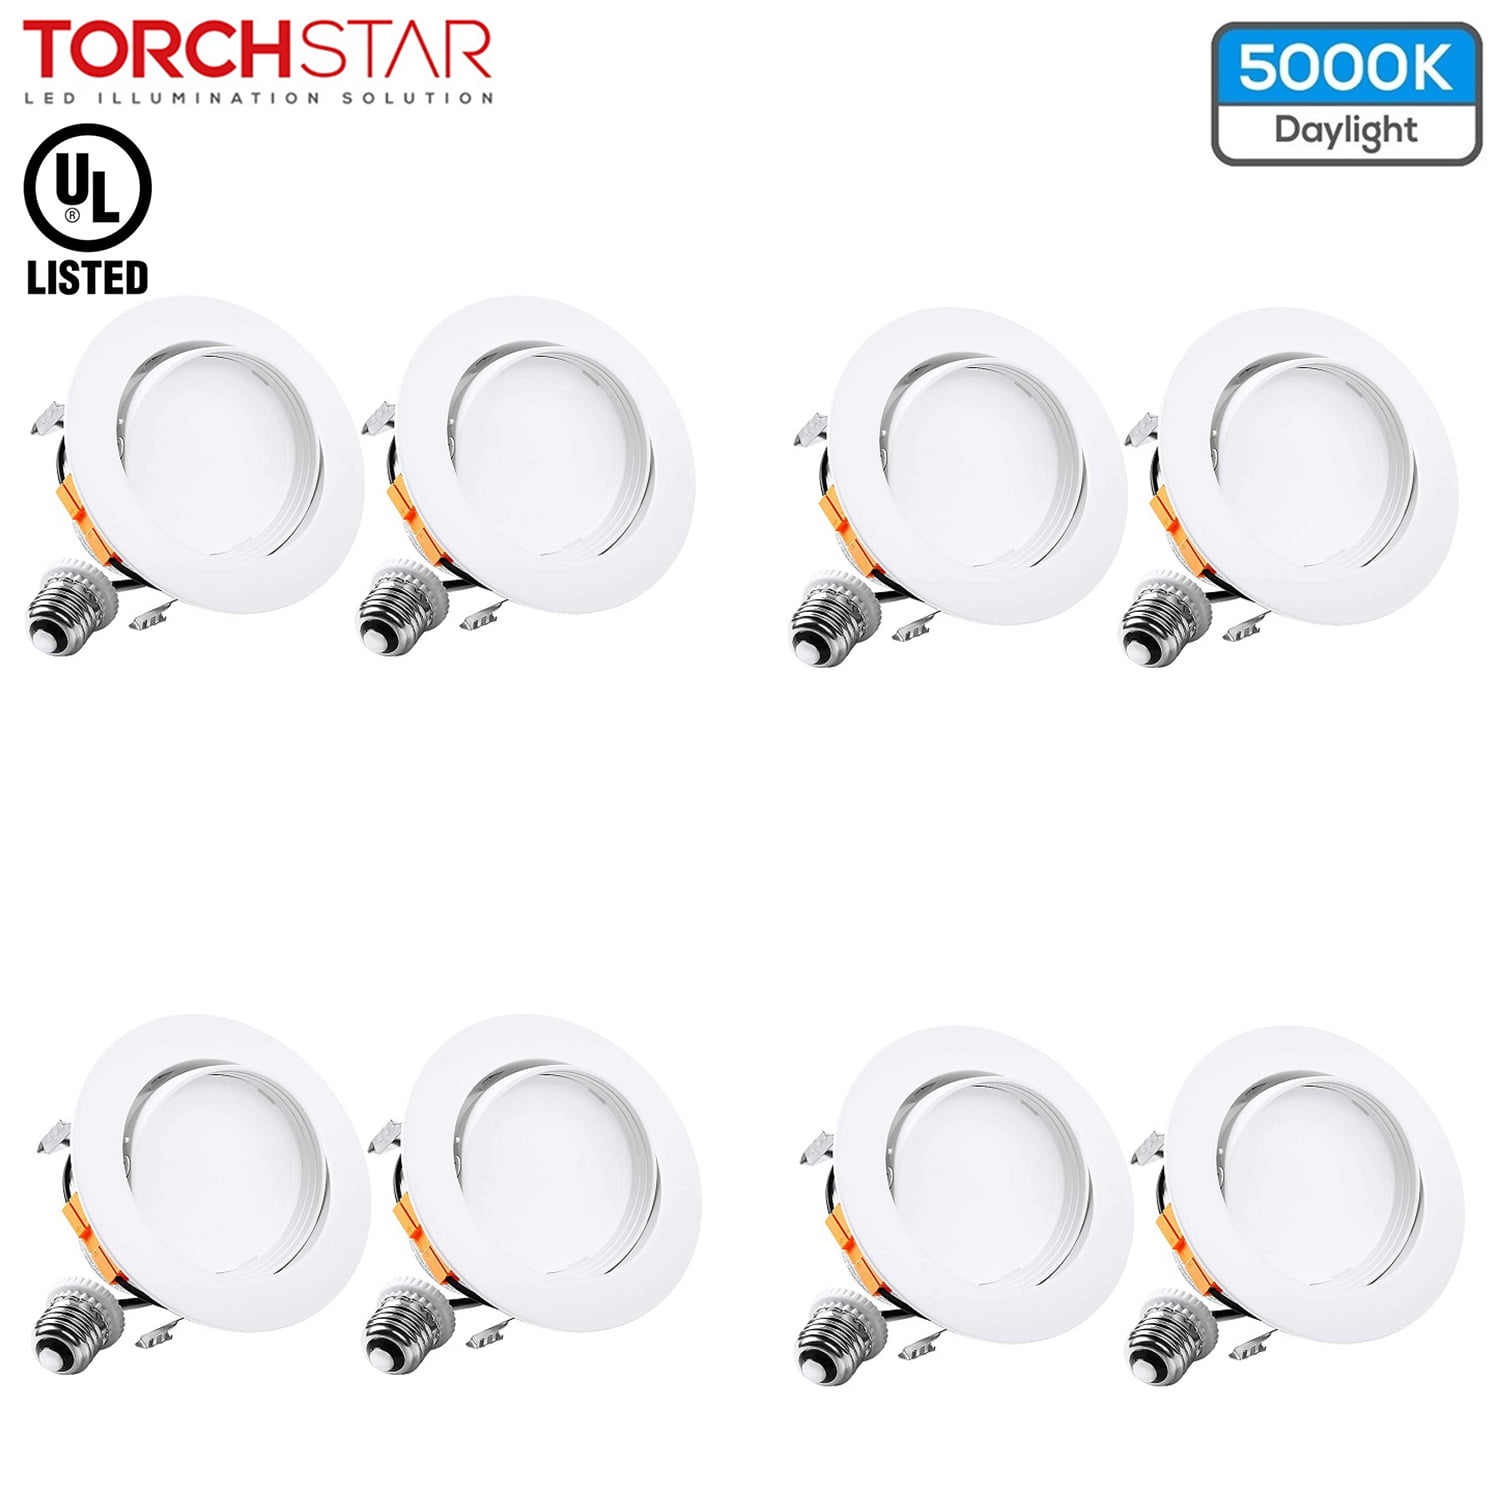 9W 4 Ultra Thin Dimmable LED Recessed Lighting Fixture Retrofit Downlight 900 Lumens 70W Equivalent LED Ceiling Light 3000K Warm White 4 Pack